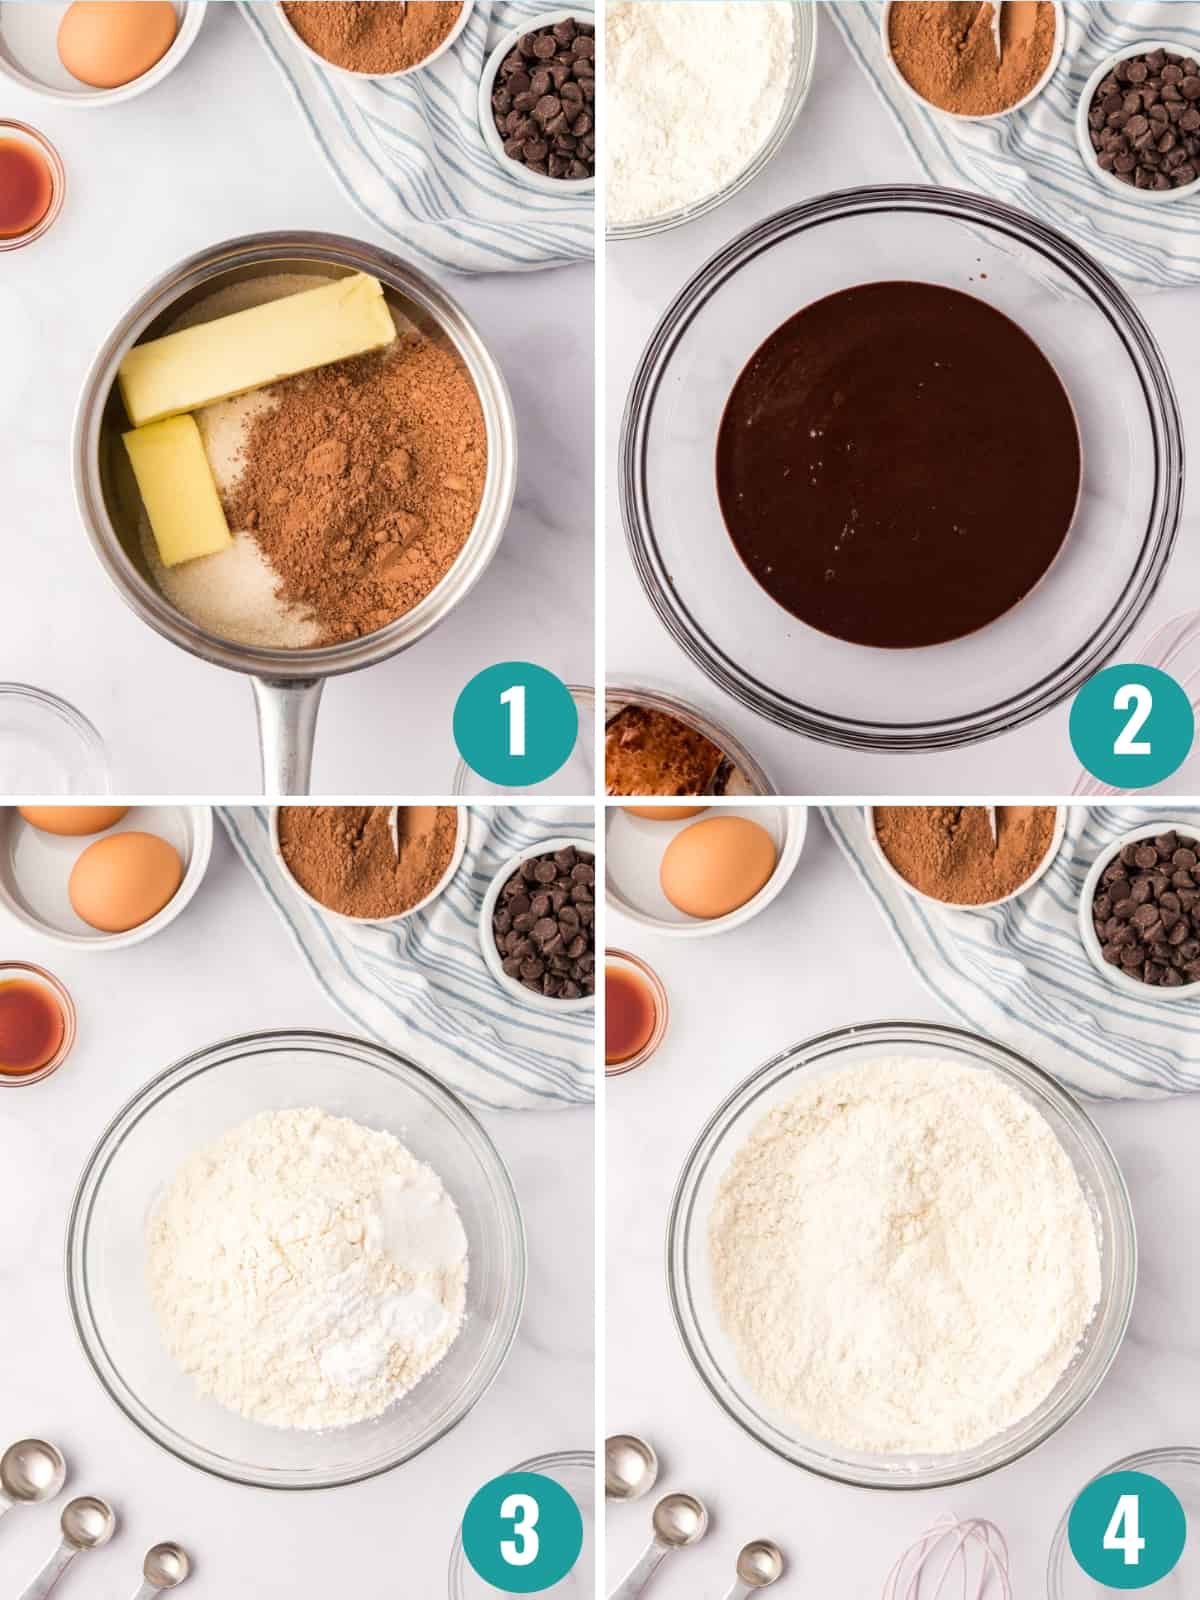 Step-by-step collage images show melting butter and cocoa mixture, pouring into a bowl, adding dry ingredients into a bowl, and mixing them.